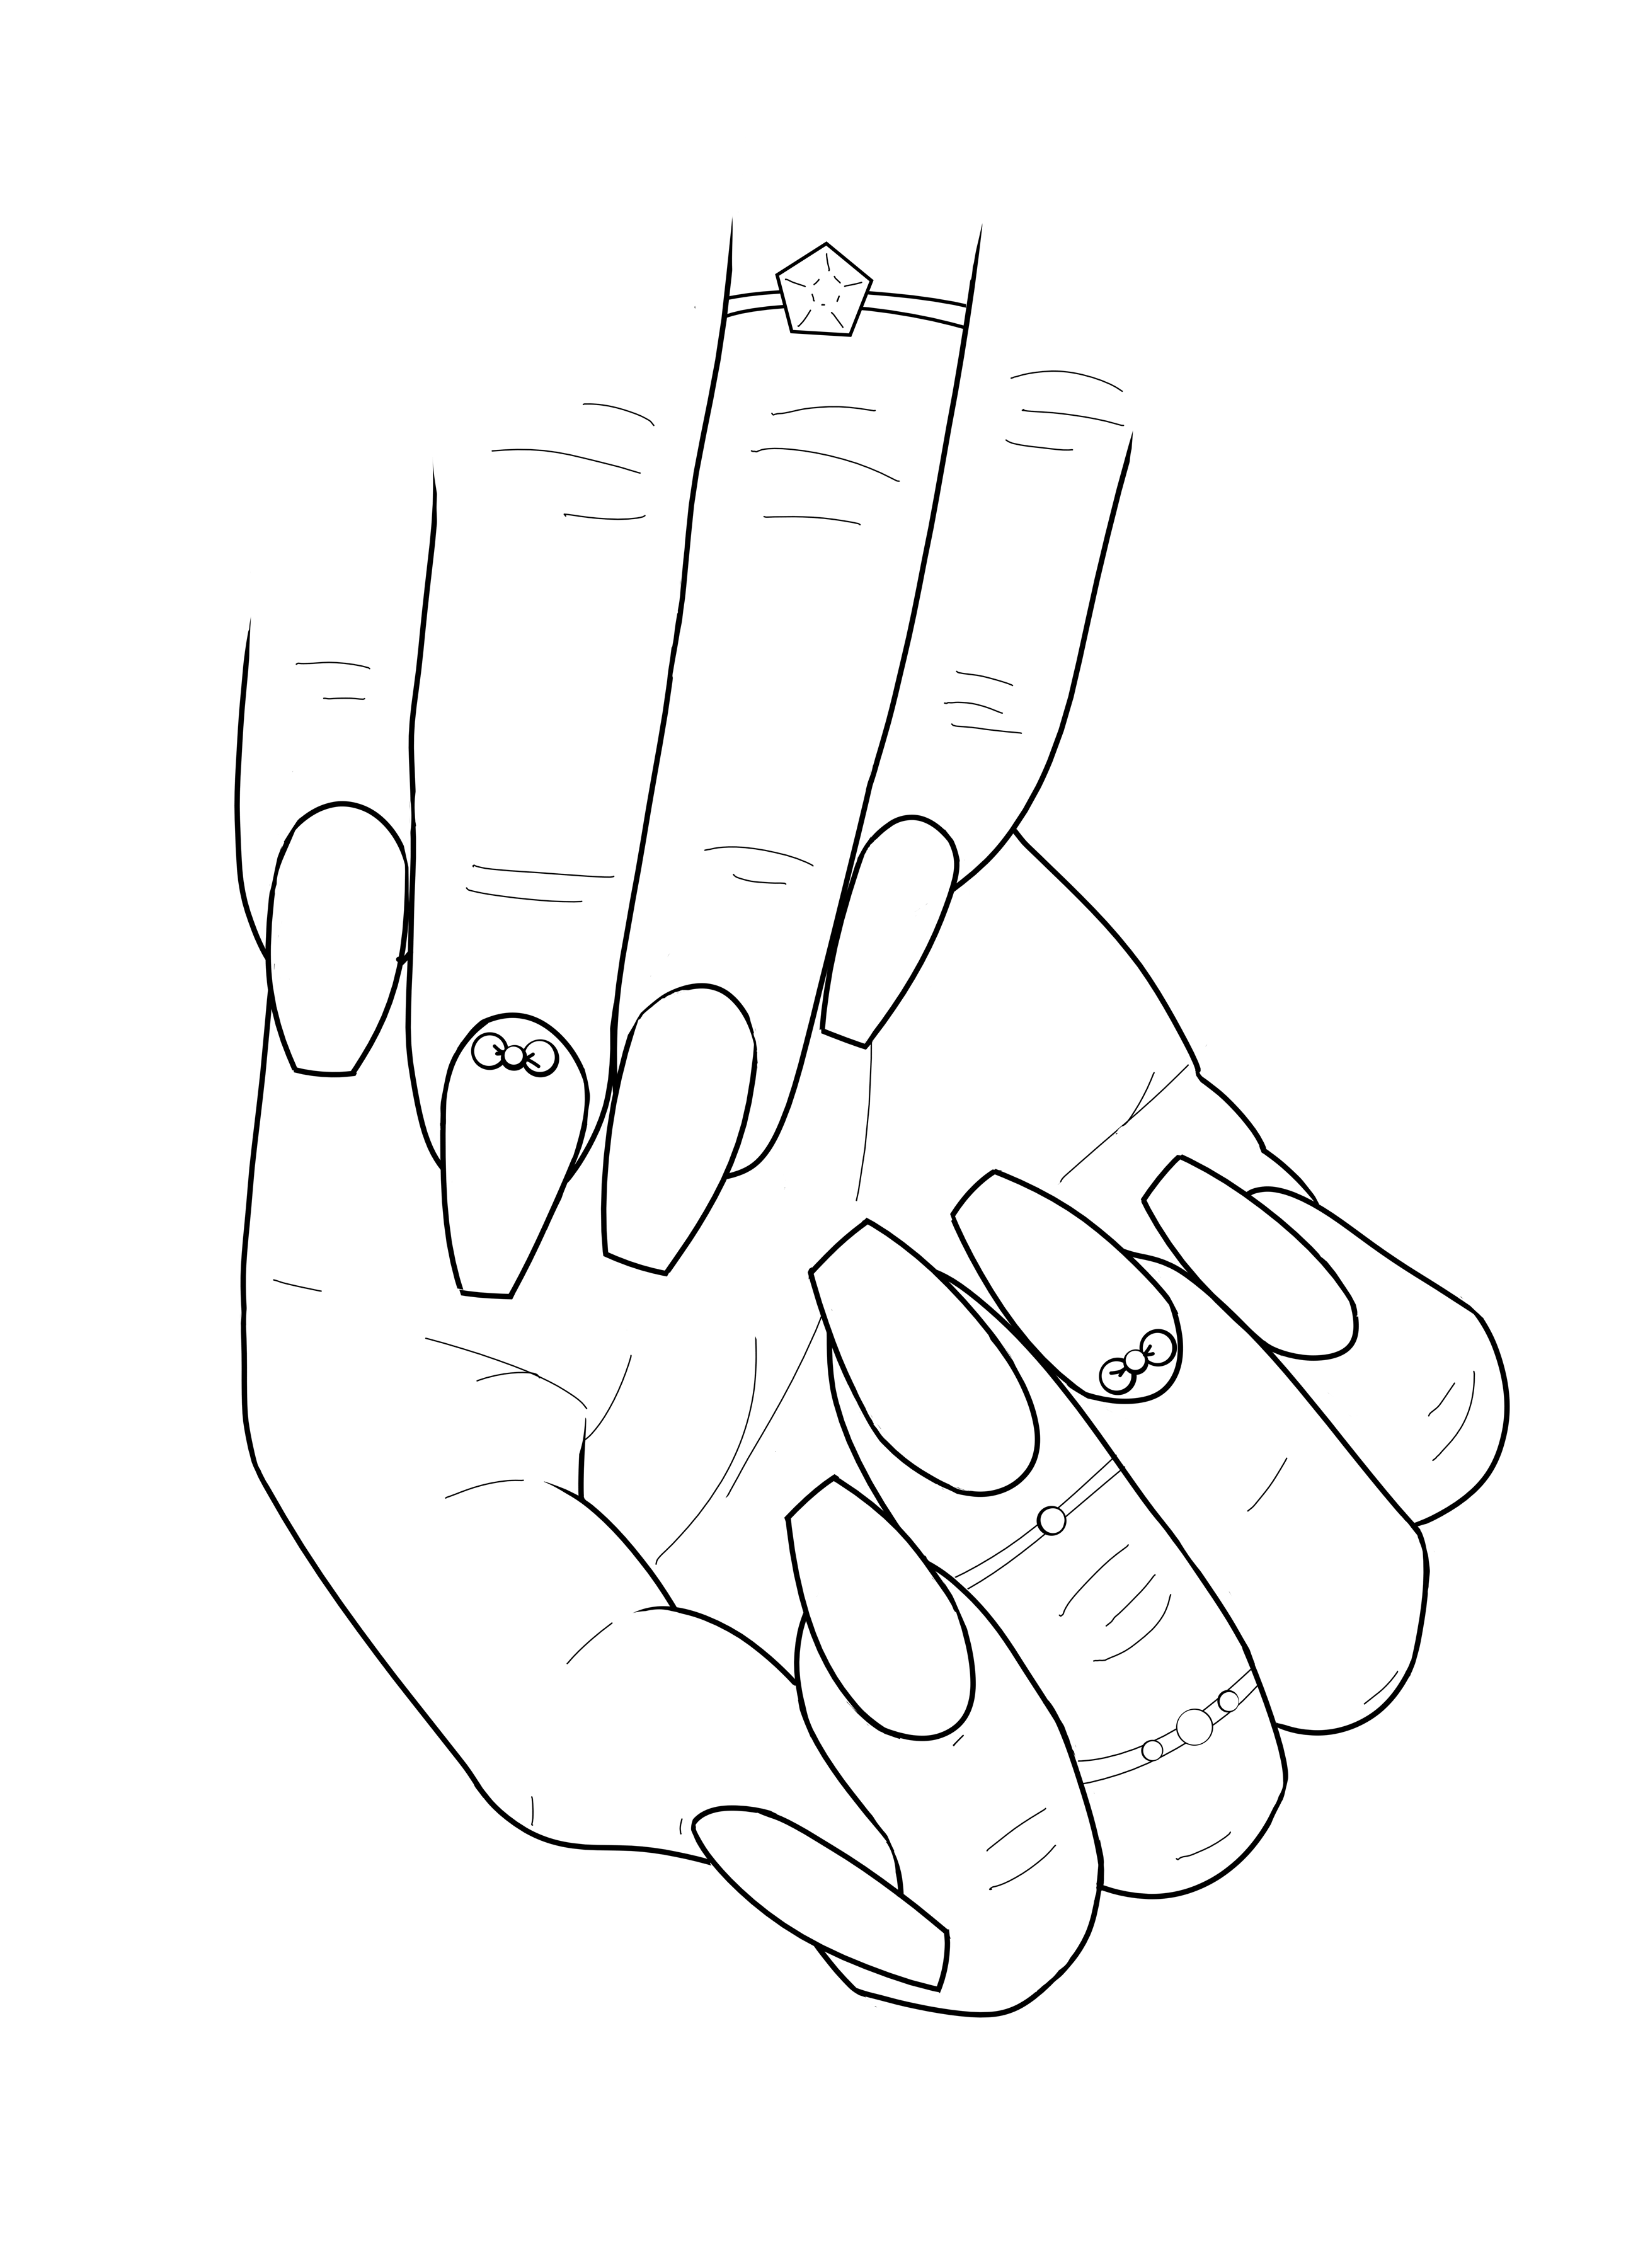 Nail clipart coloring page, Nail coloring page Transparent FREE for